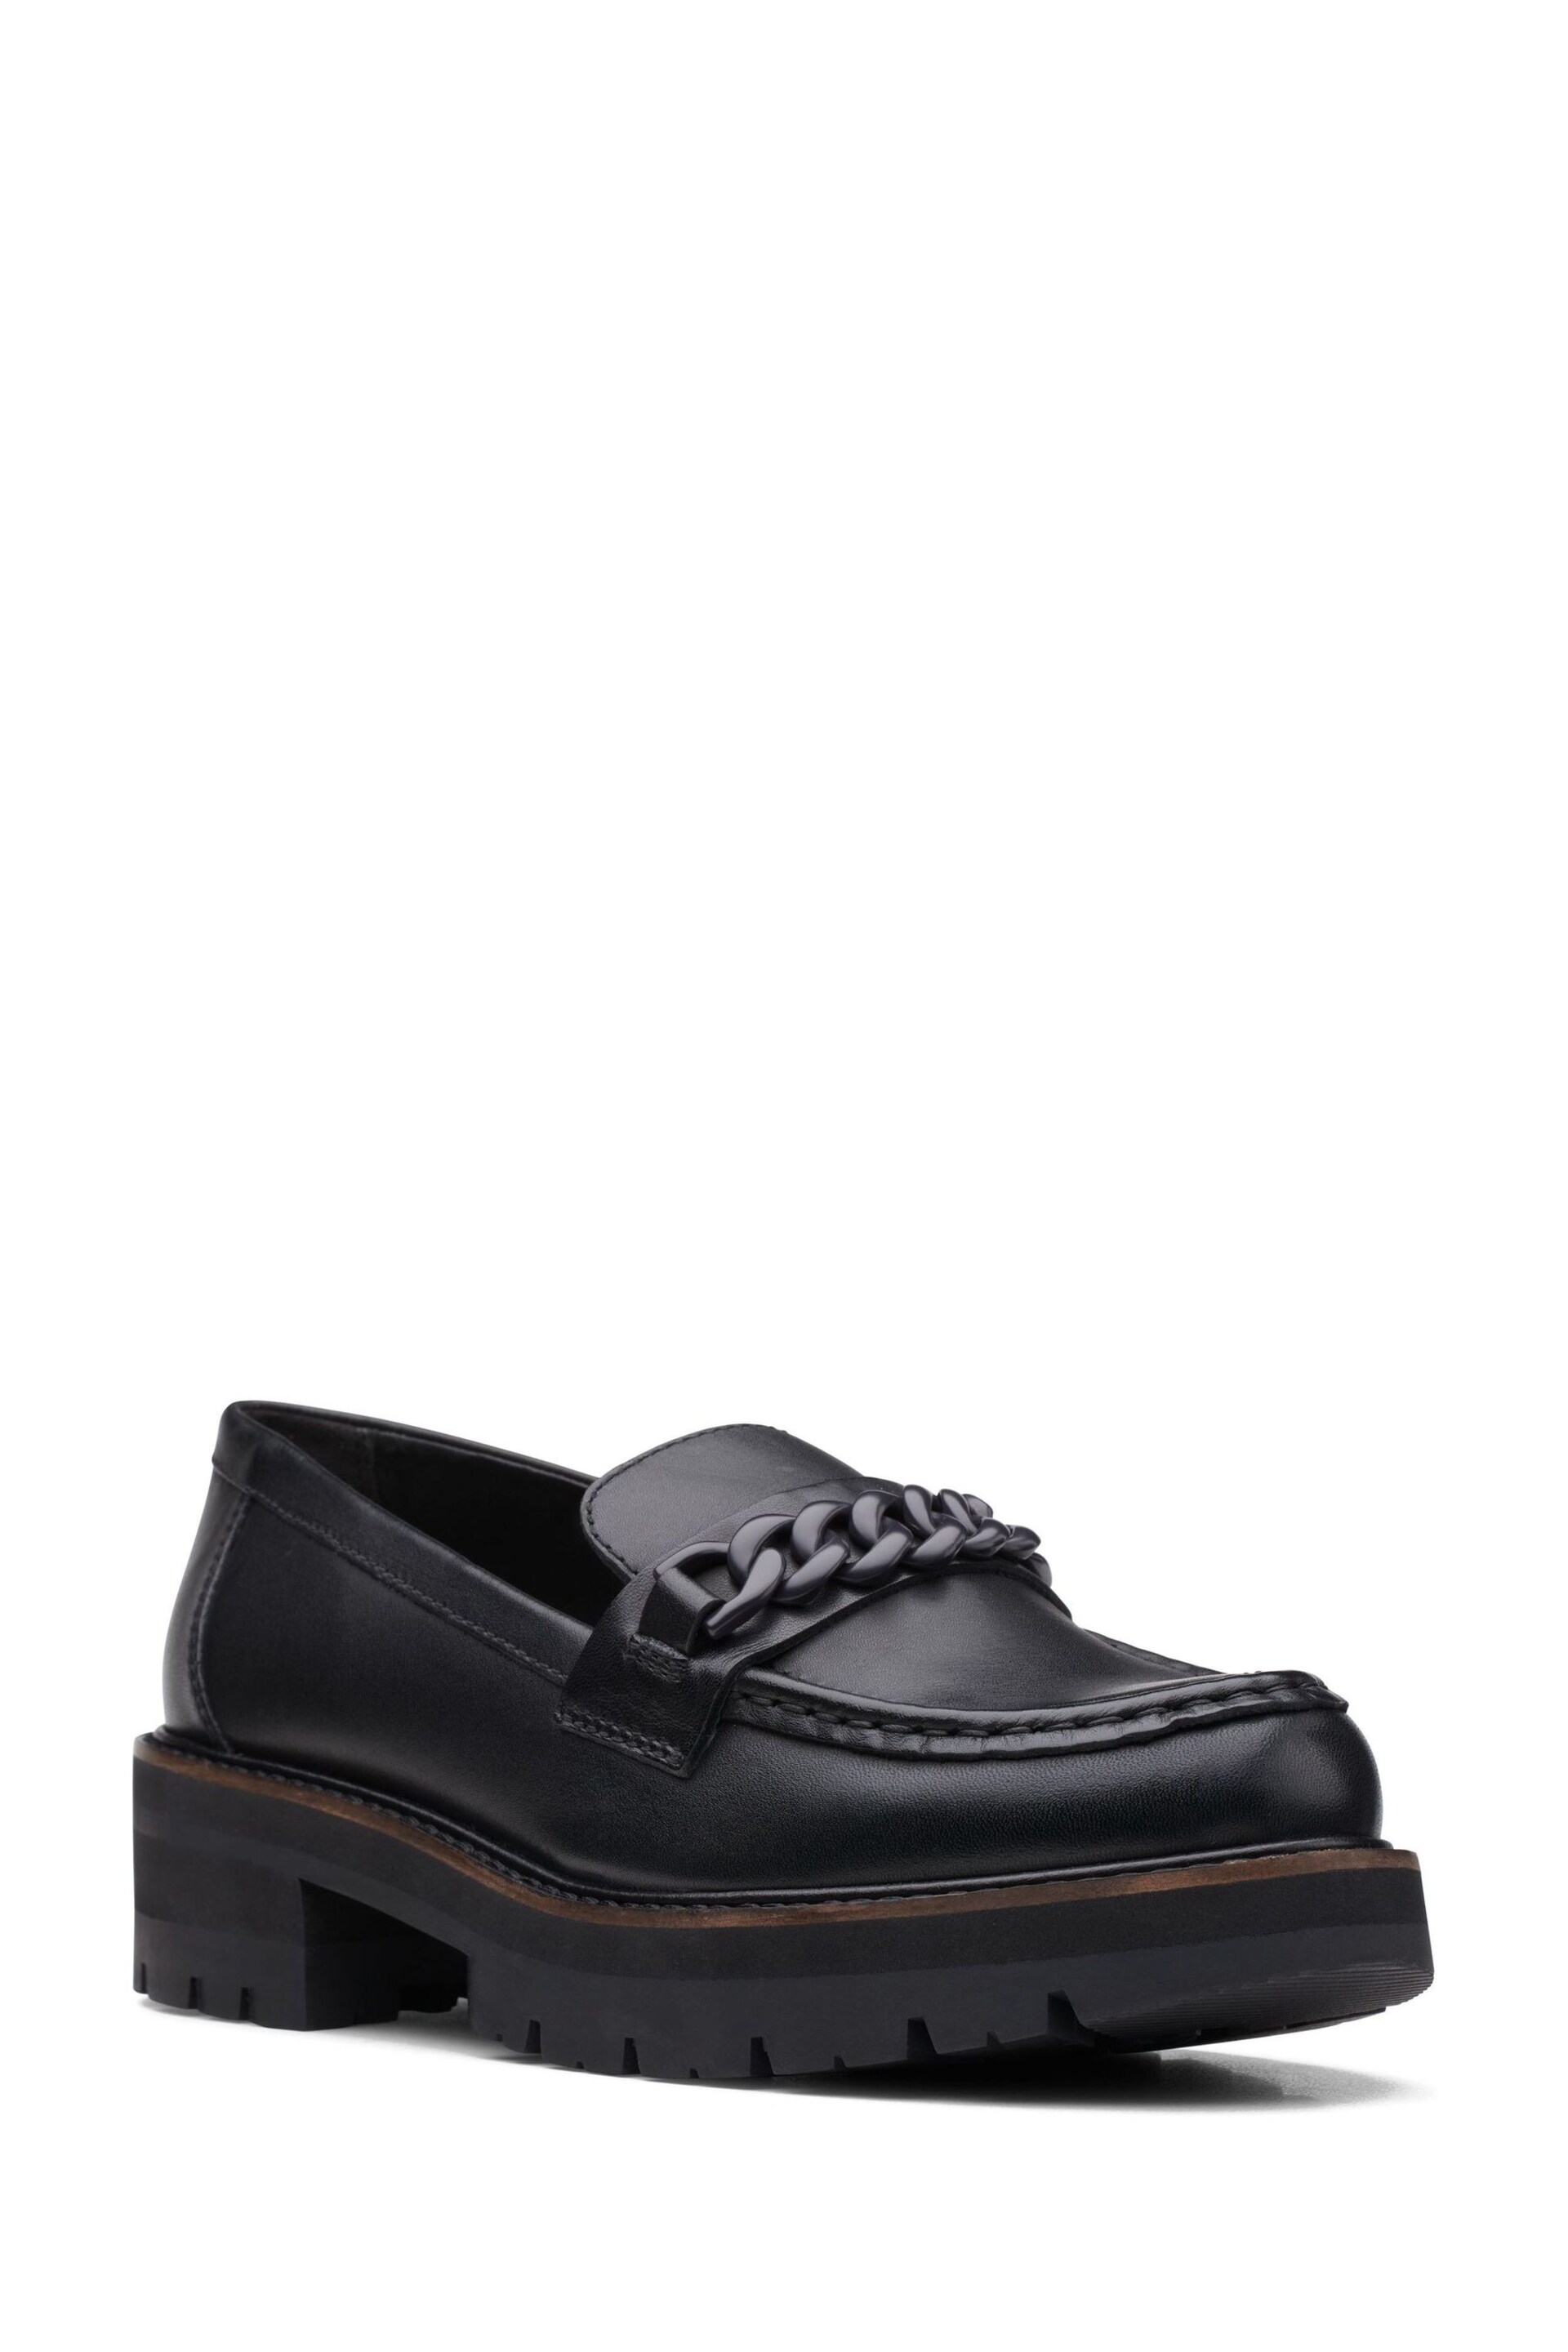 Clarks Black Leather Orianna Edge Loafer Shoes - Image 3 of 7